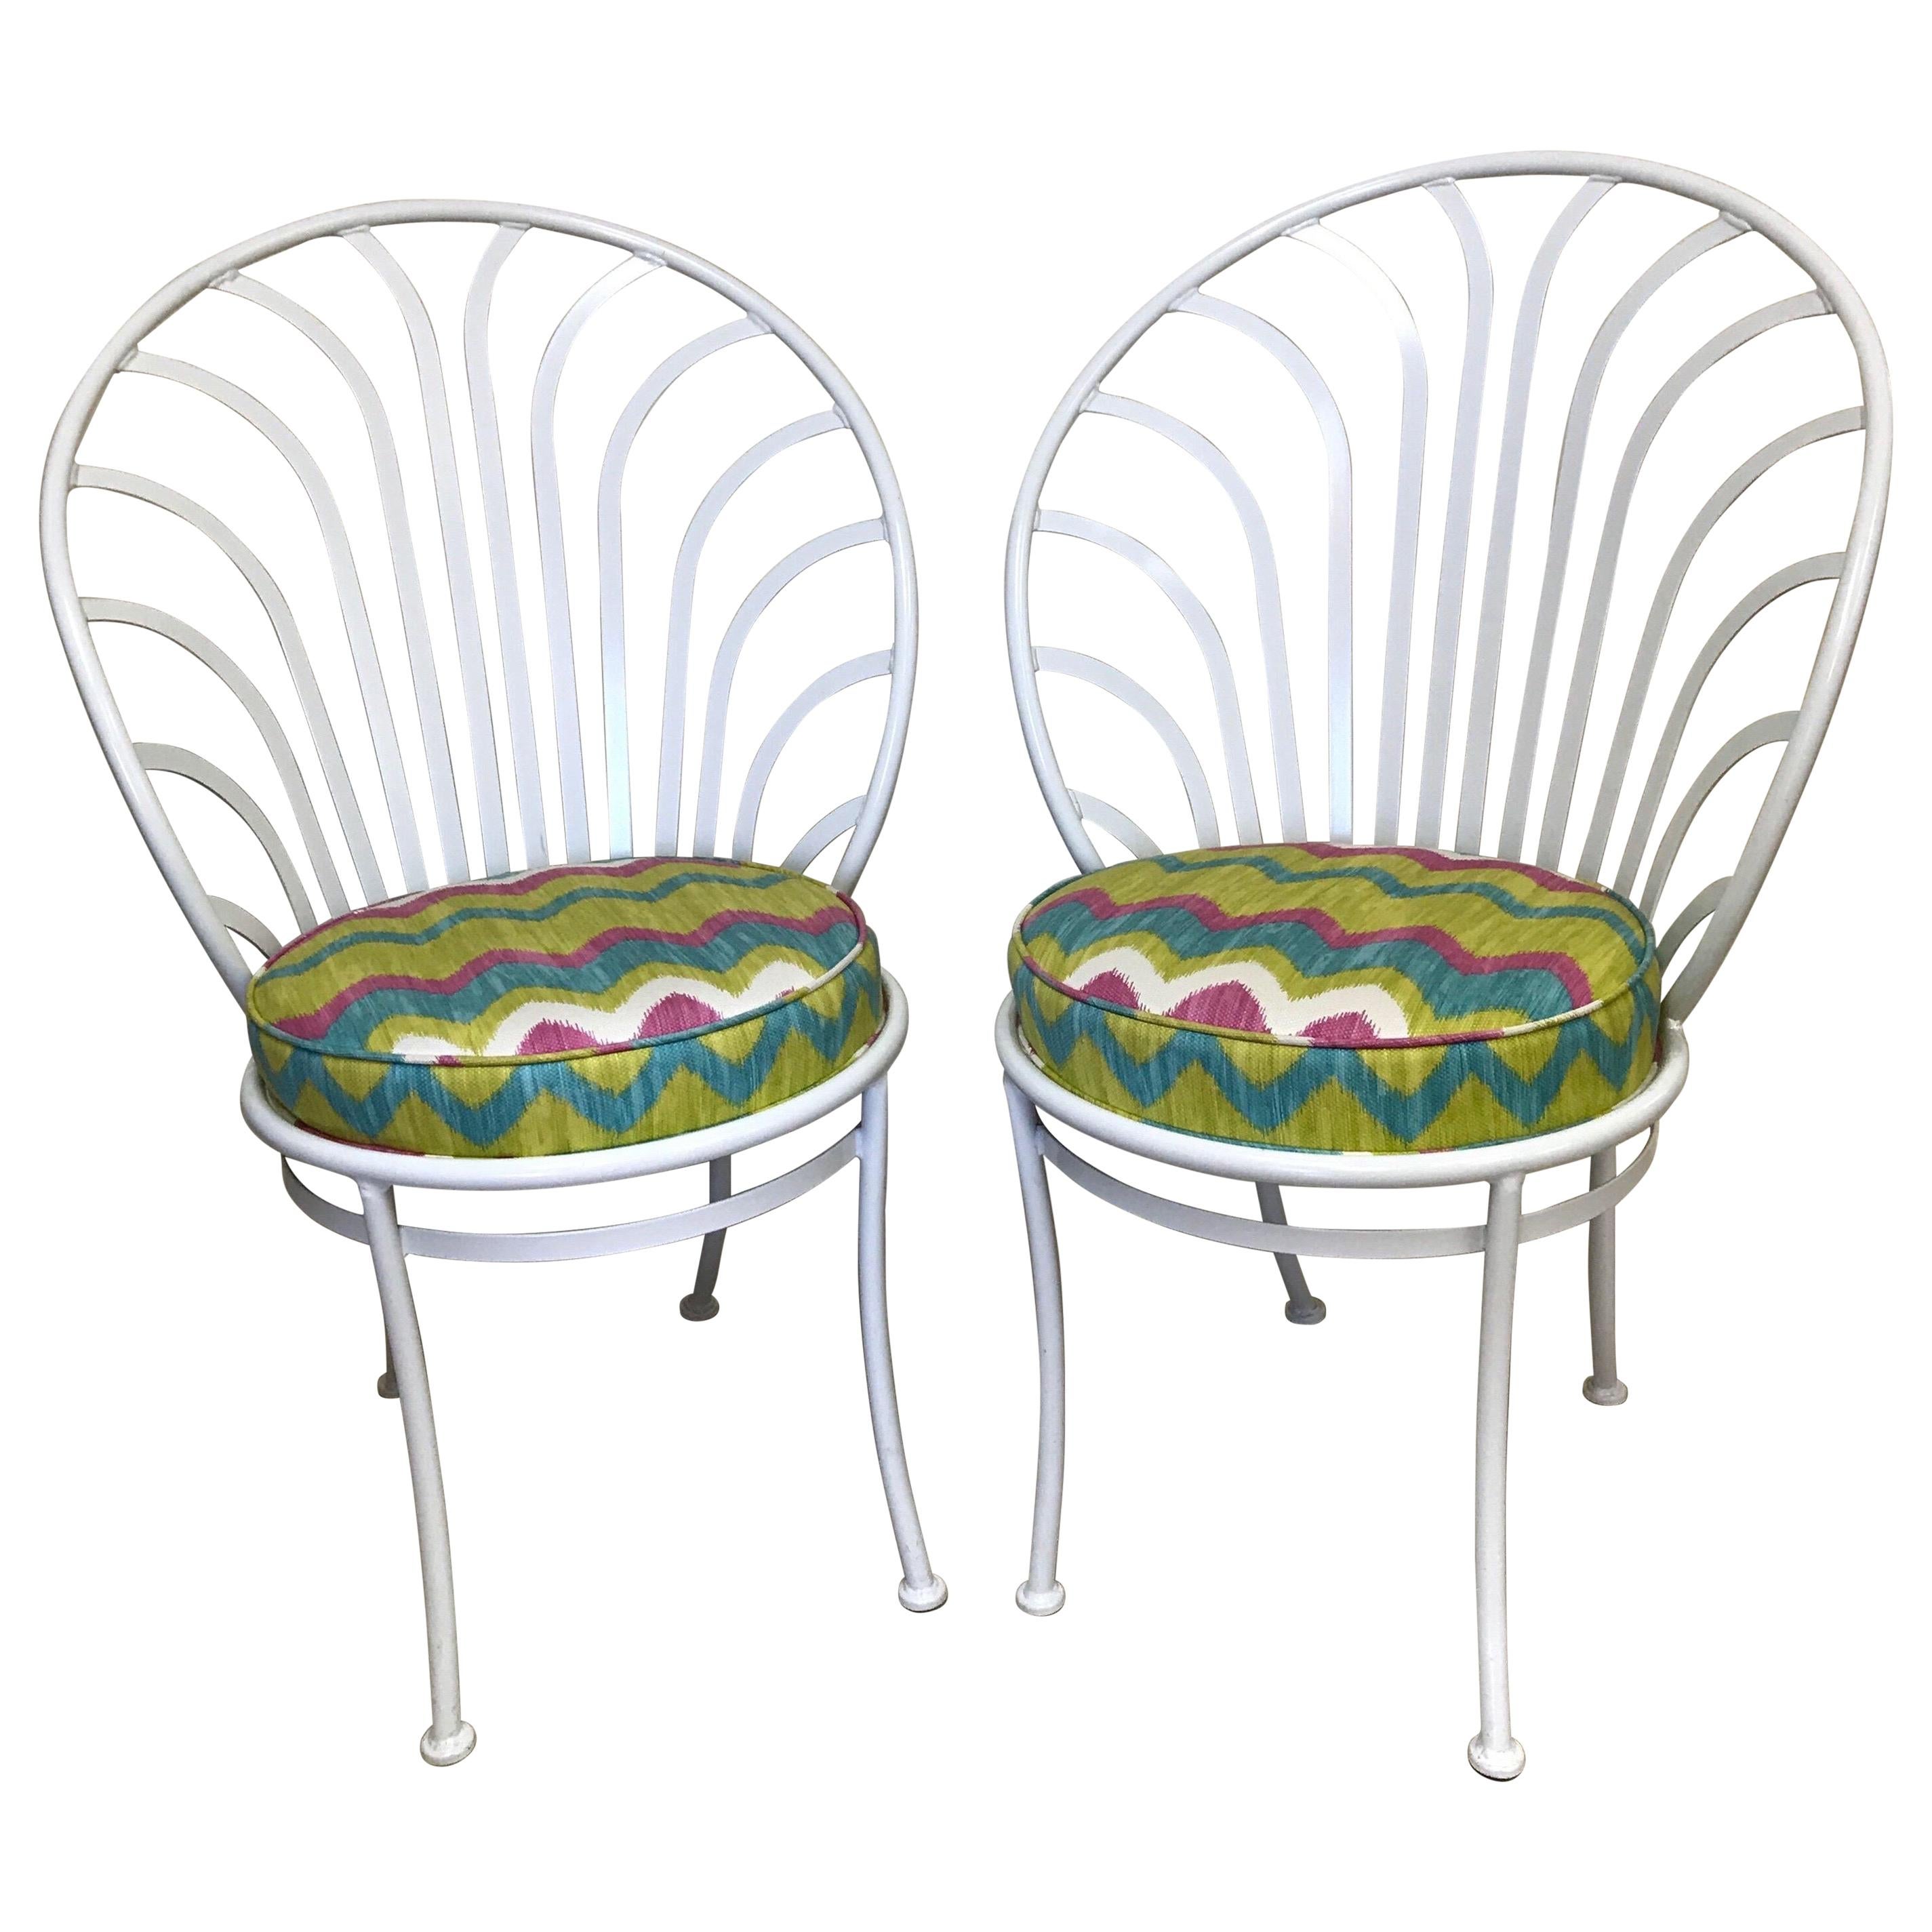 Pair of Painted Metal Peacock Chairs For Sale